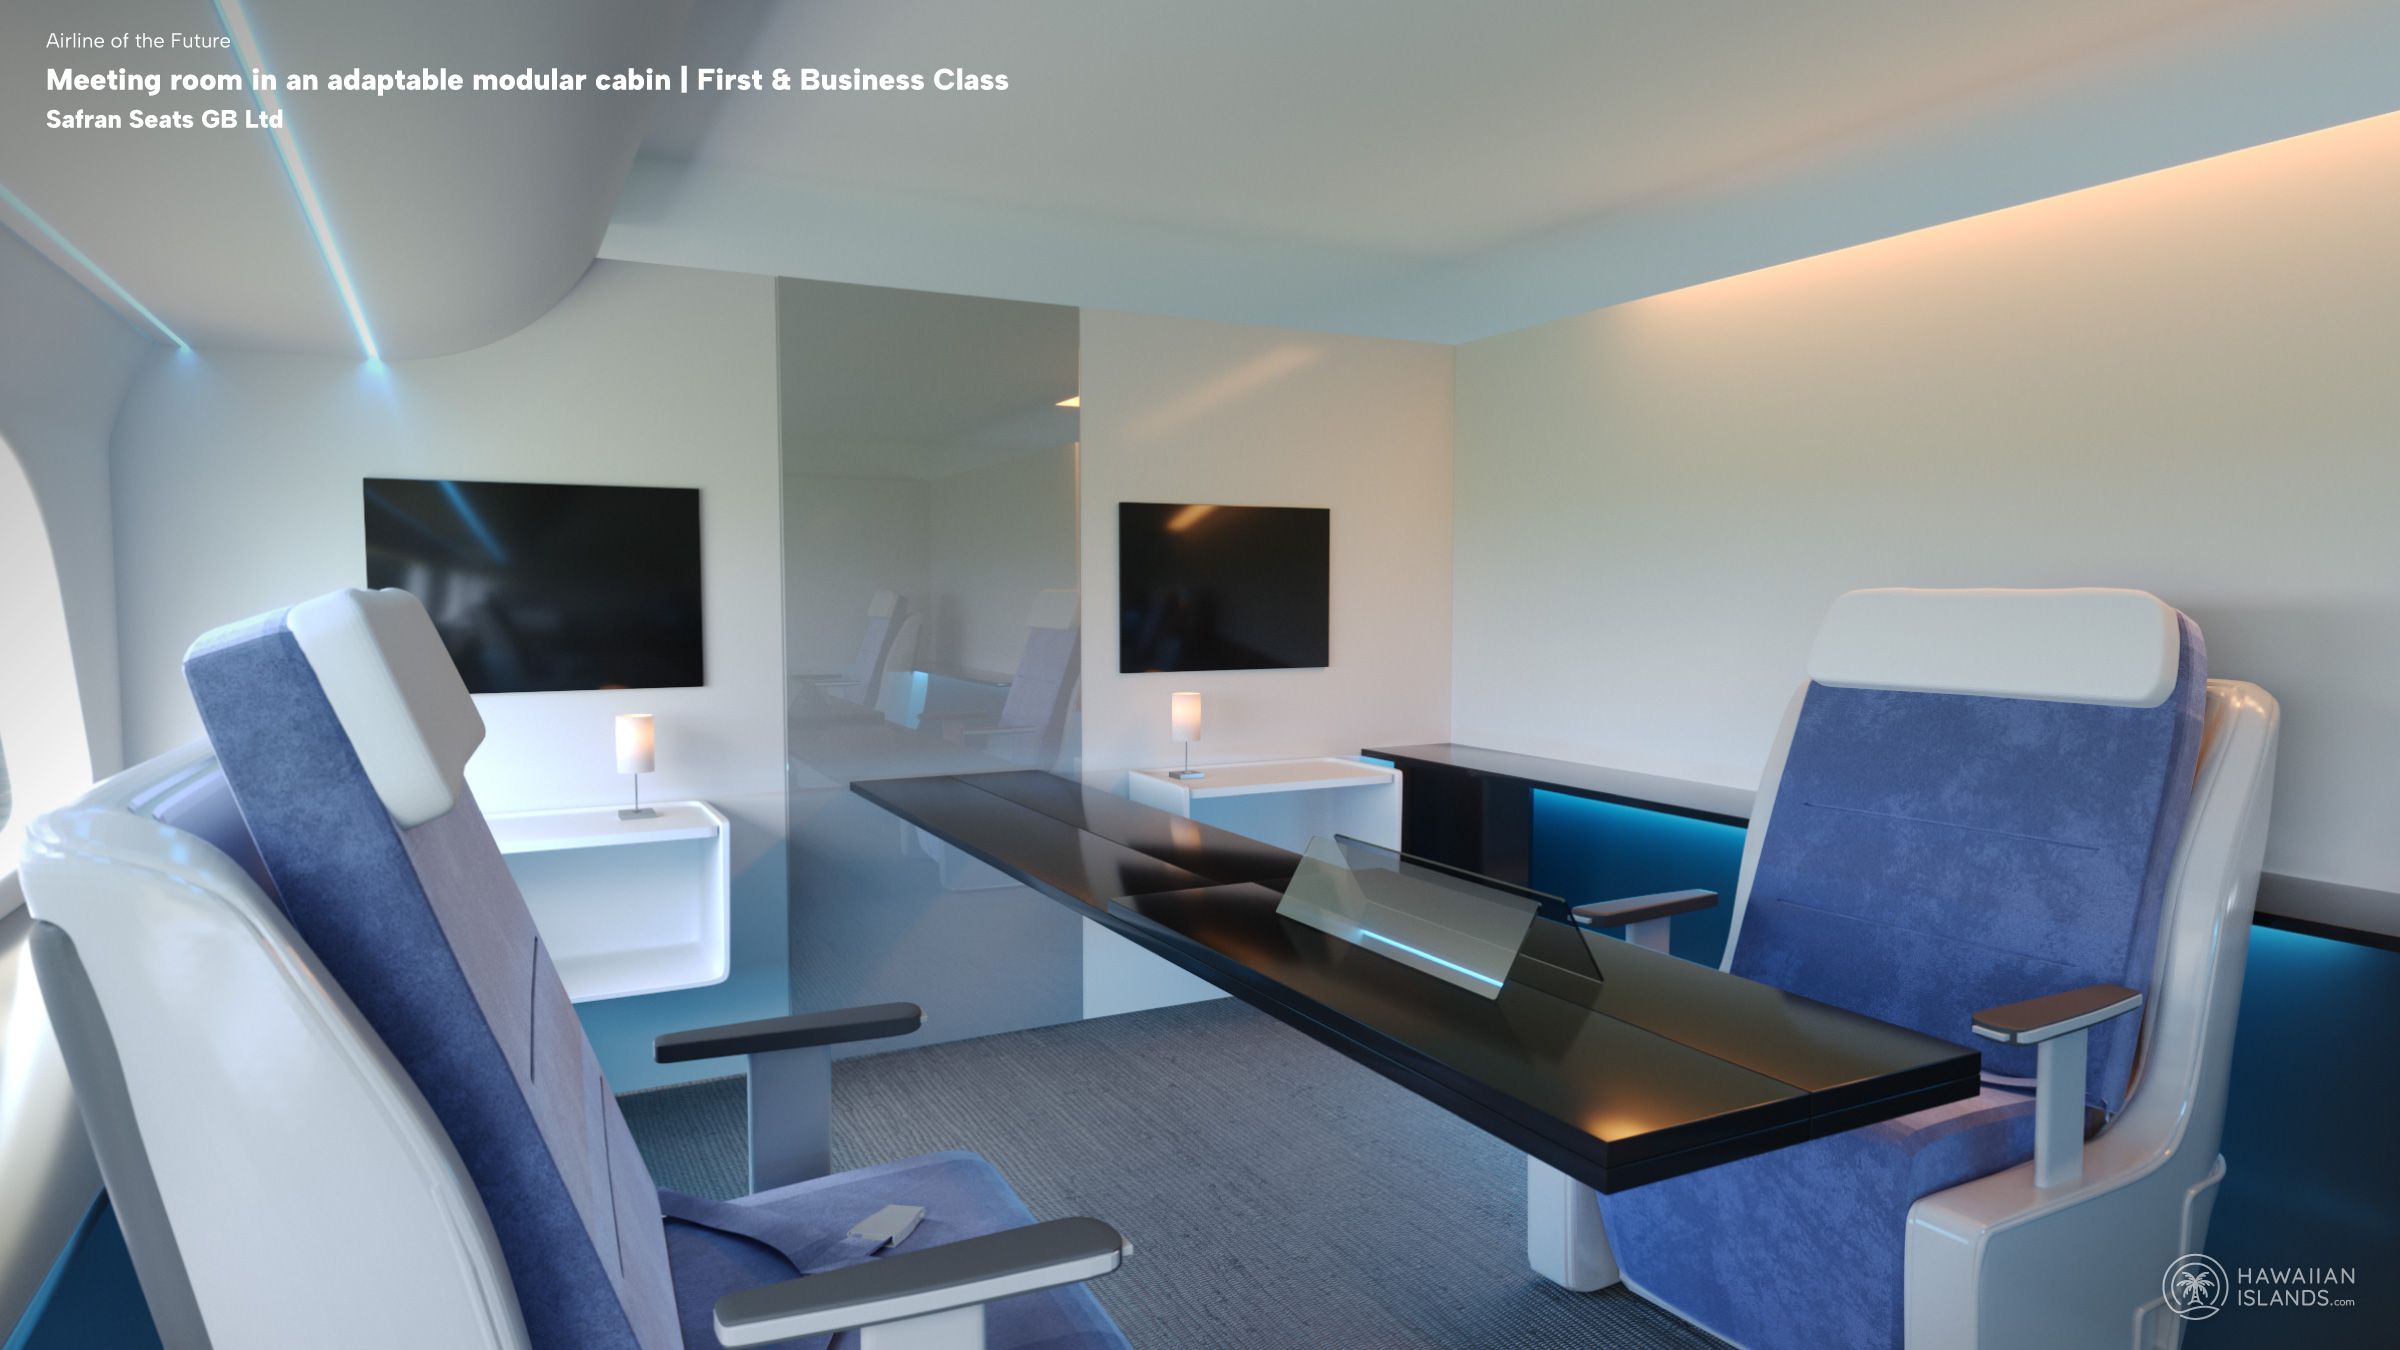 A render of a meeting room on an aircraft, made from movable walls, tables, and business class seats.